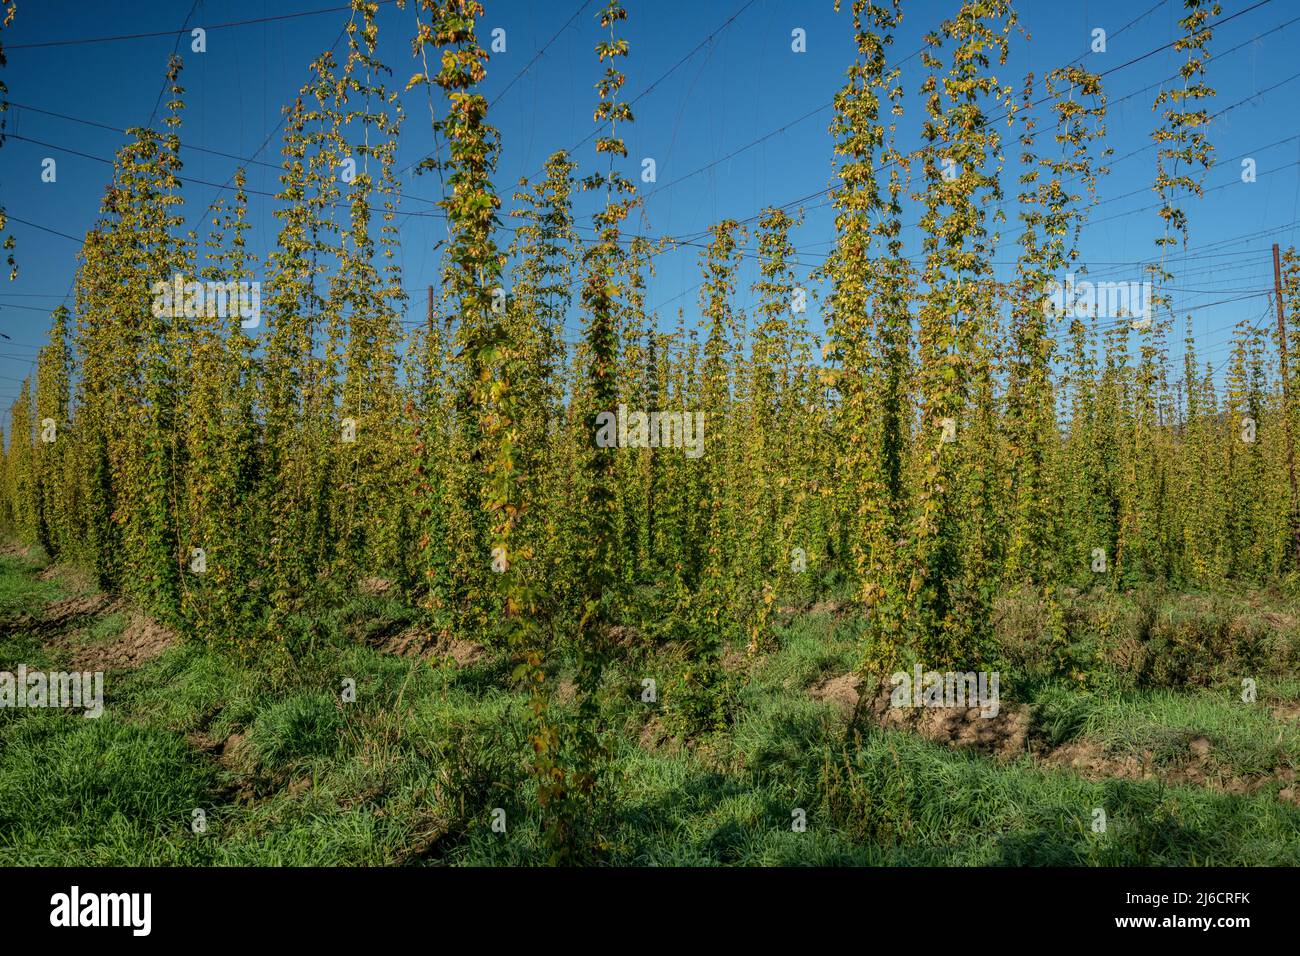 Cultivated Hop garden, Hop, Humulus lupulus, for the brewing industry. Romania. Stock Photo